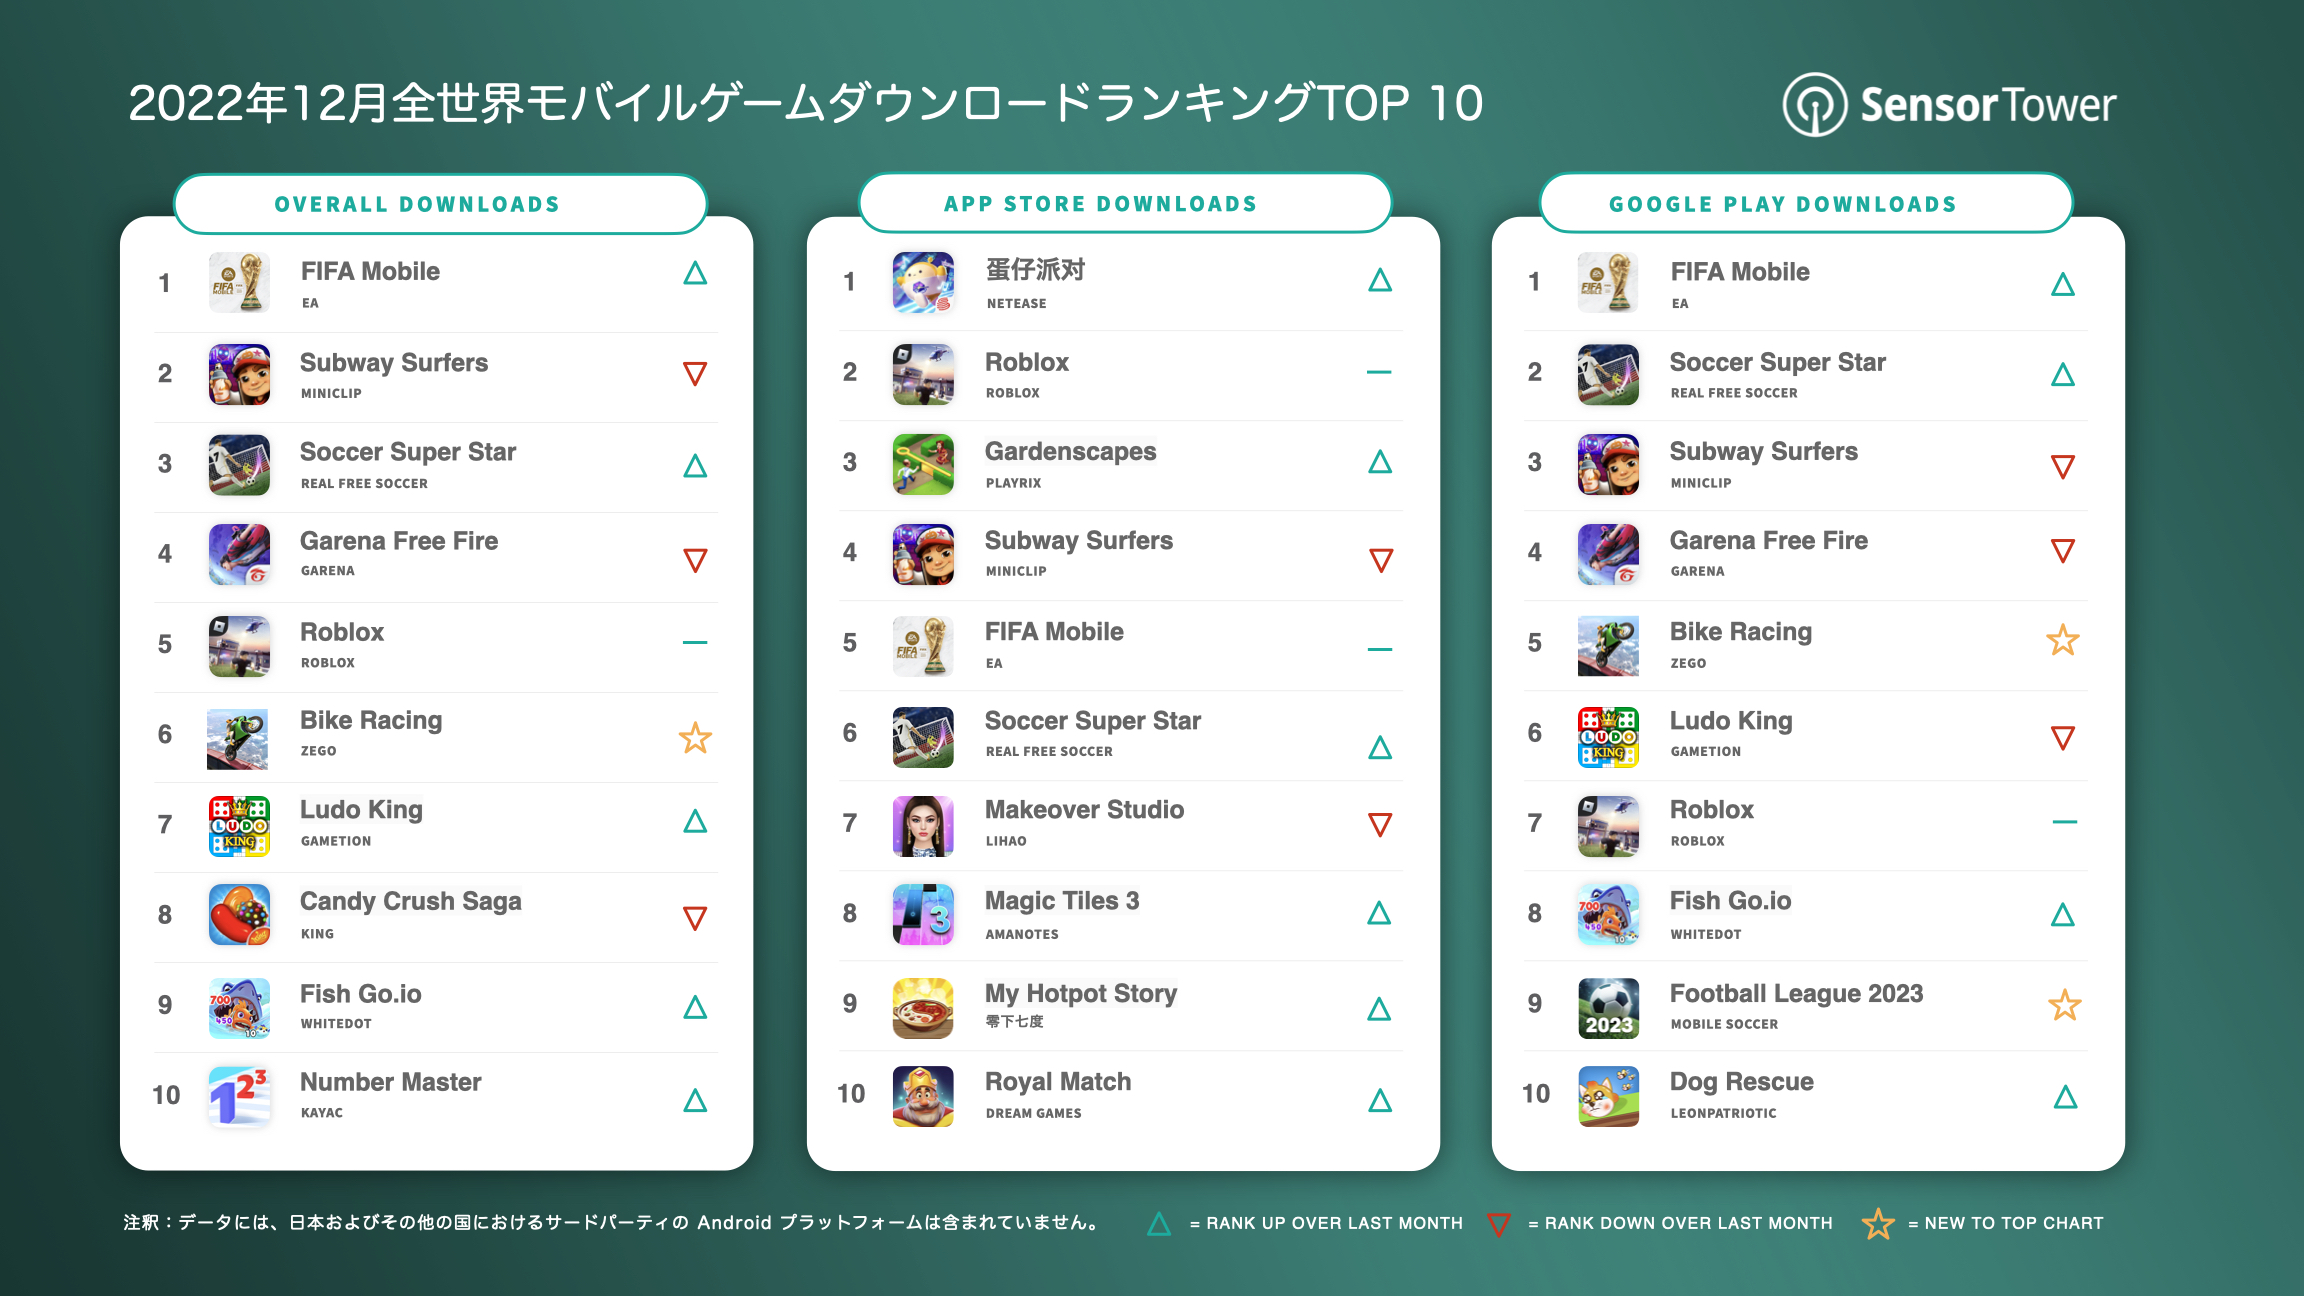 -JP- Top Mobile Games Worldwide for December 2022 by Downloads